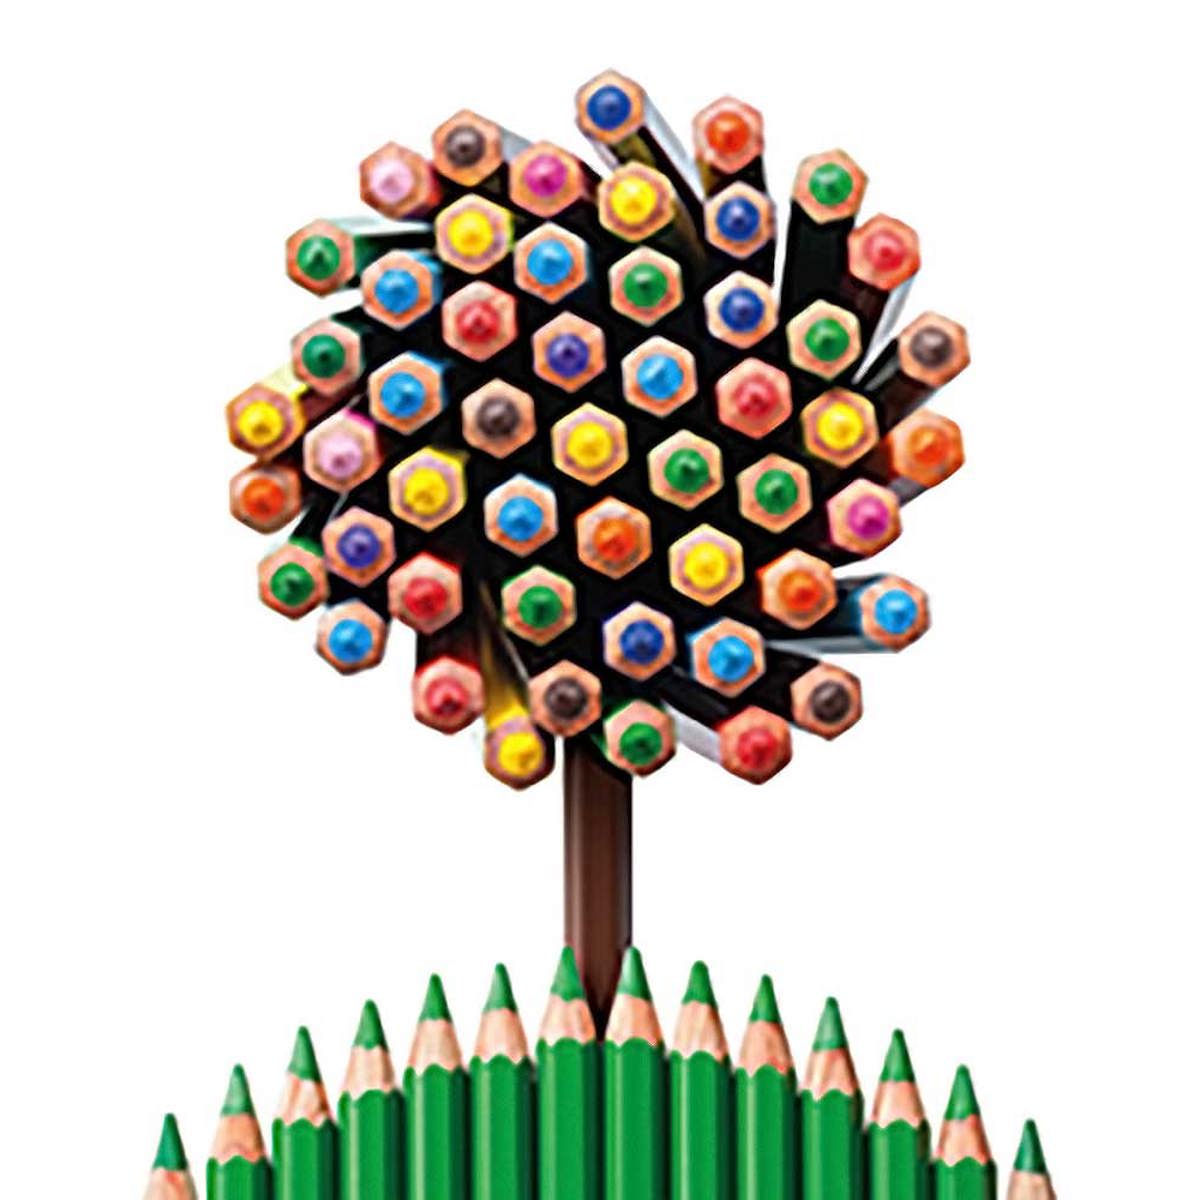 Graphic of tree made of pencils